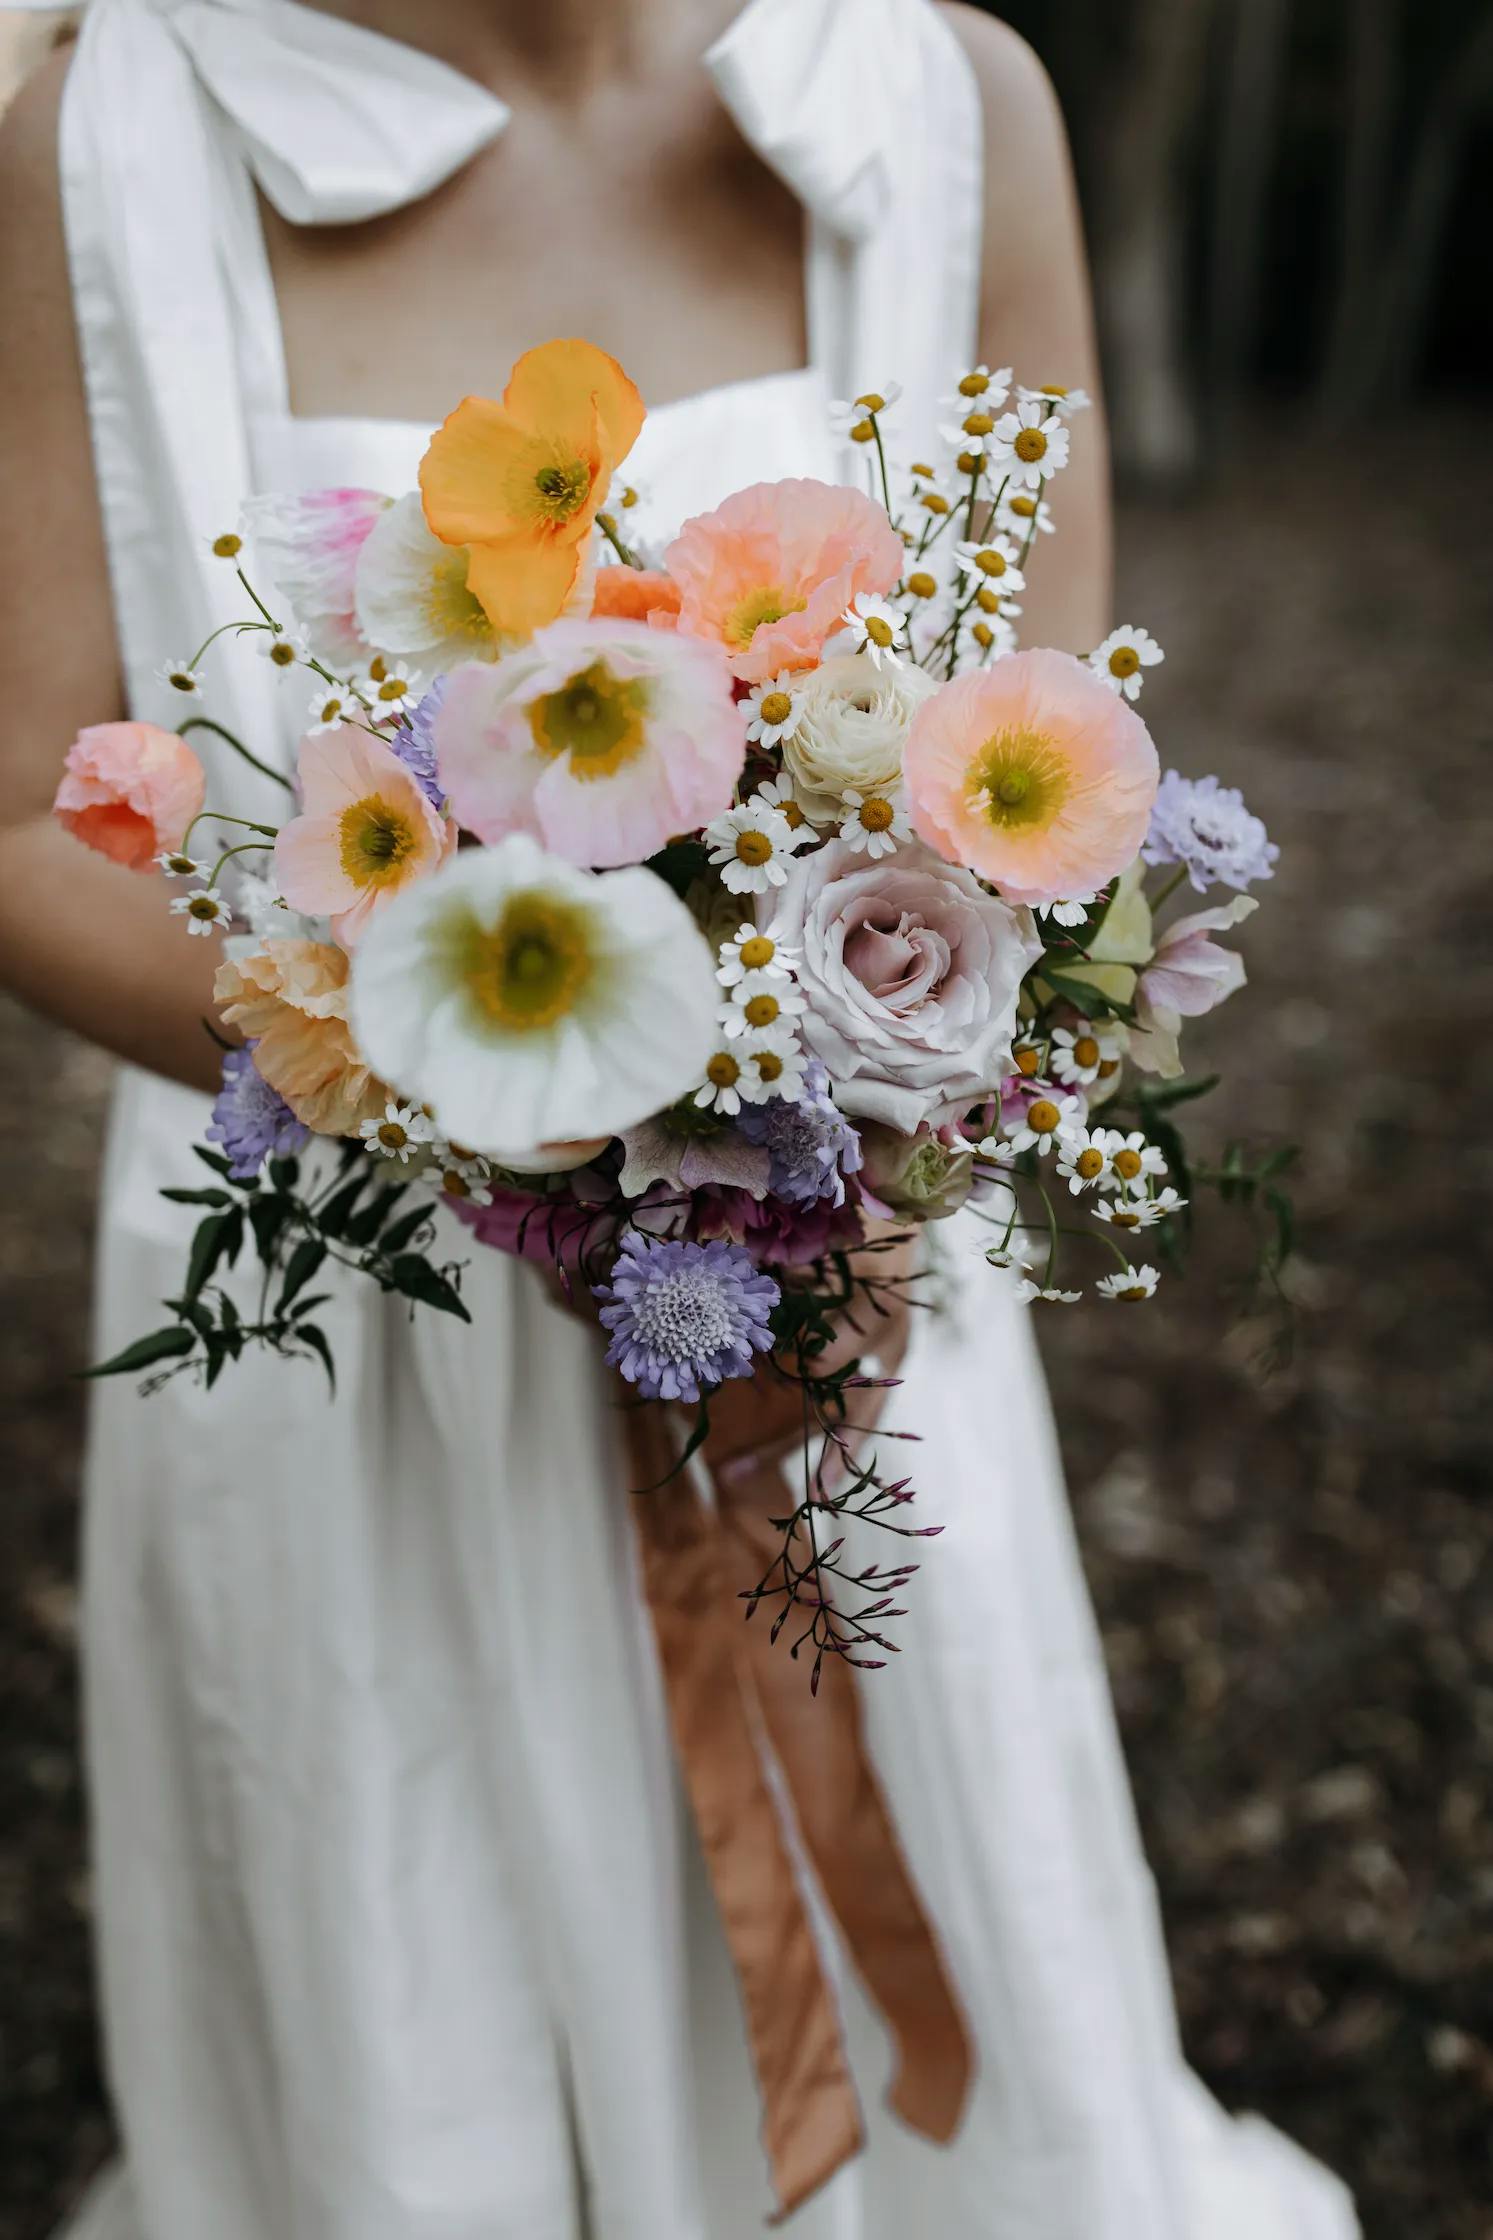 A person wearing a sleeveless white dress holds a vibrant bouquet of flowers, including orange poppies, white daisies, and light purple blooms, with a brown ribbon tied around the stems. The background is outdoors with a blurred, earthy ground.